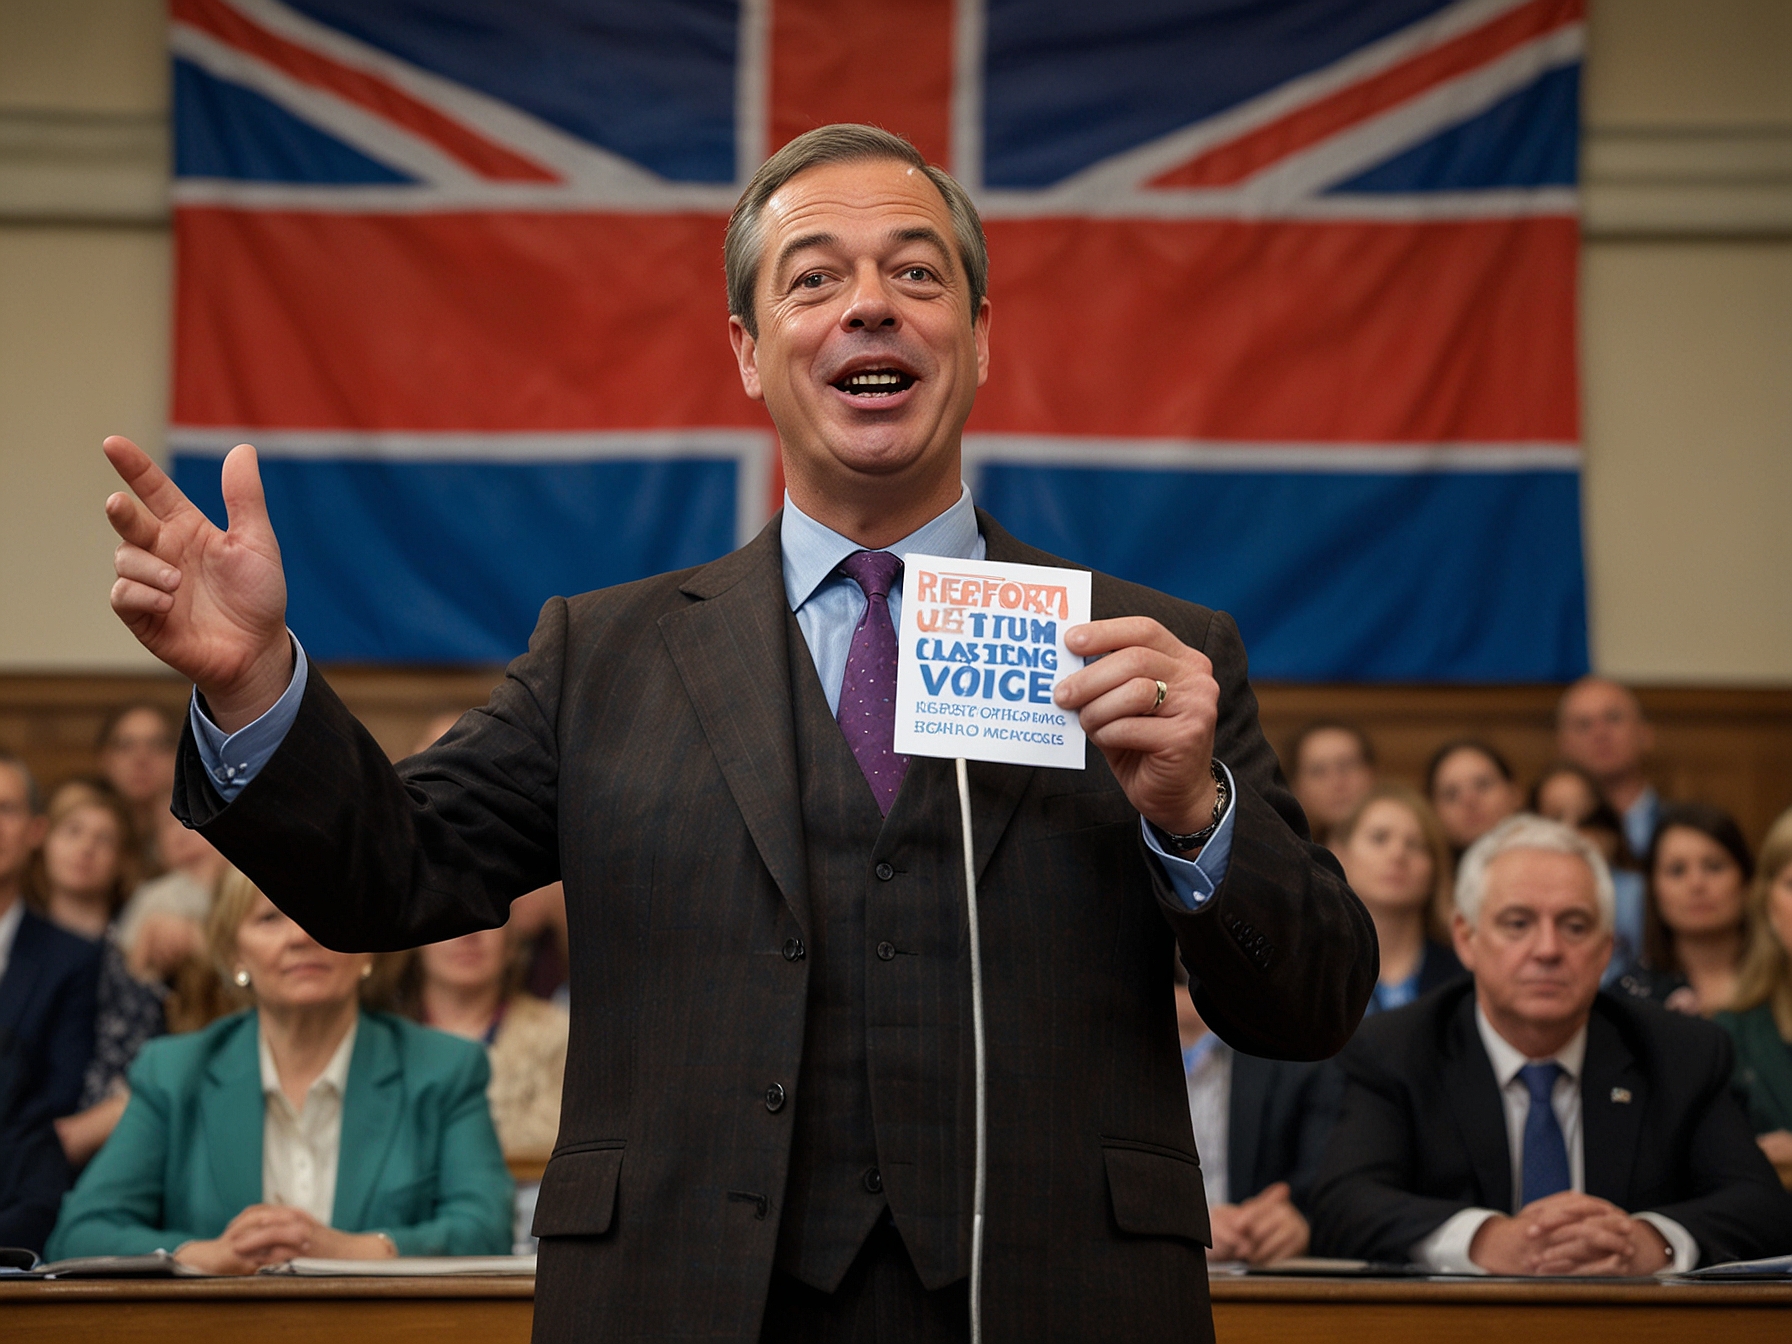 Nigel Farage passionately delivering a speech at a town hall meeting, holding up the newly launched Reform UK's manifesto, while a banner behind him reads 'Reform UK: Your Voice for Change'.